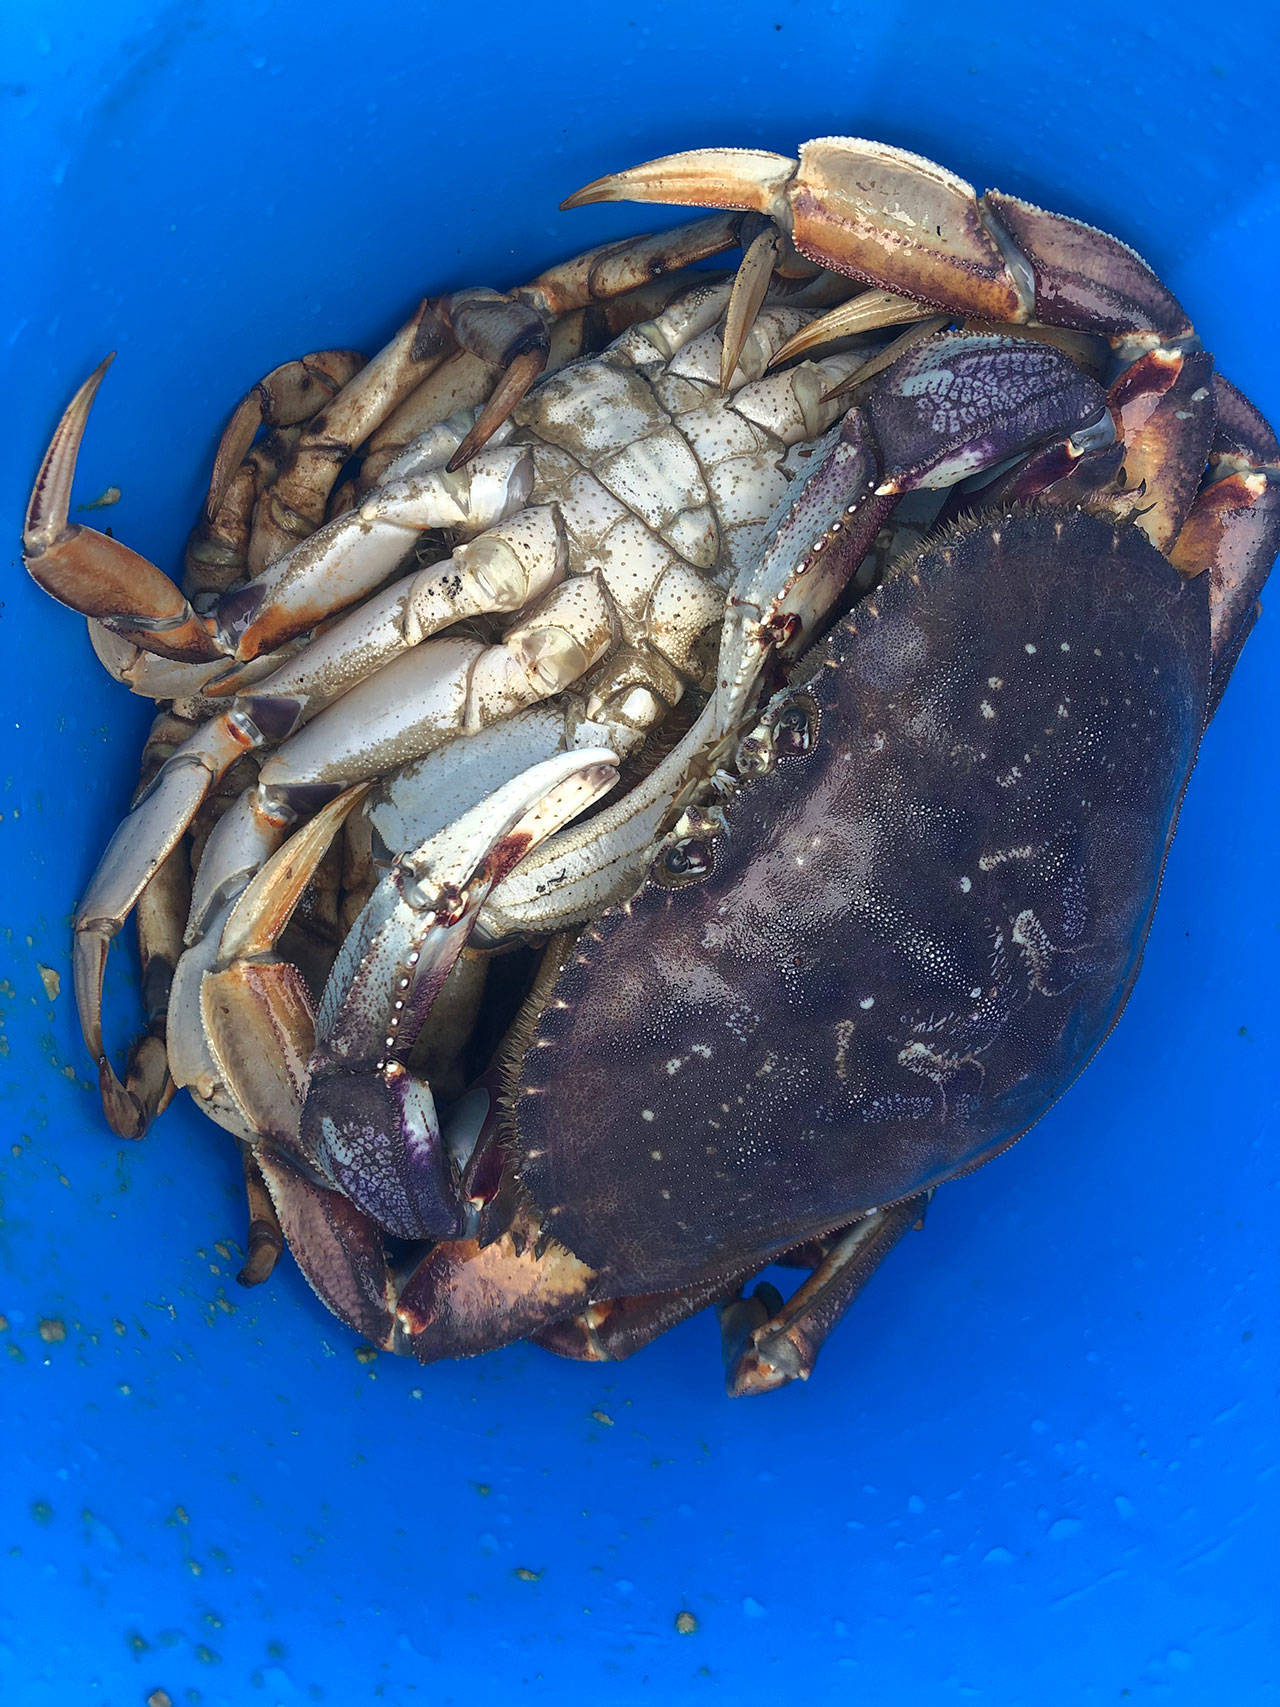 Pinched crabs make crabbers crabby